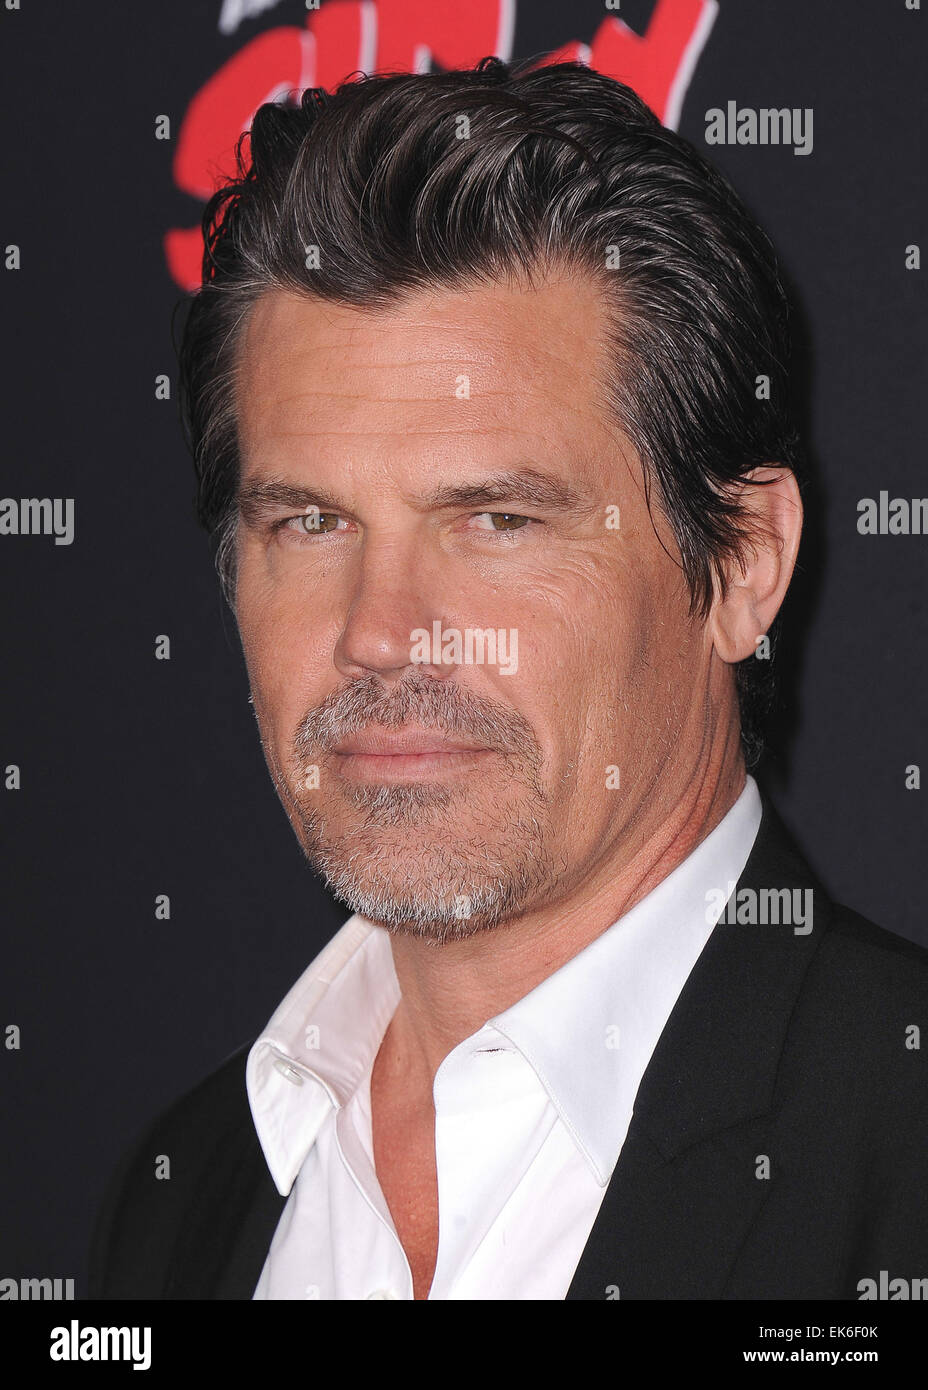 The 'Sin City: A Dame To Kill For' Los Angeles Premiere at TCL Chinese Theatre on August 19, 2014 in Hollywood, California. Featuring: Josh Brolin Where: Los Angeles, California, United States When: 19 Aug 2014 Stock Photo